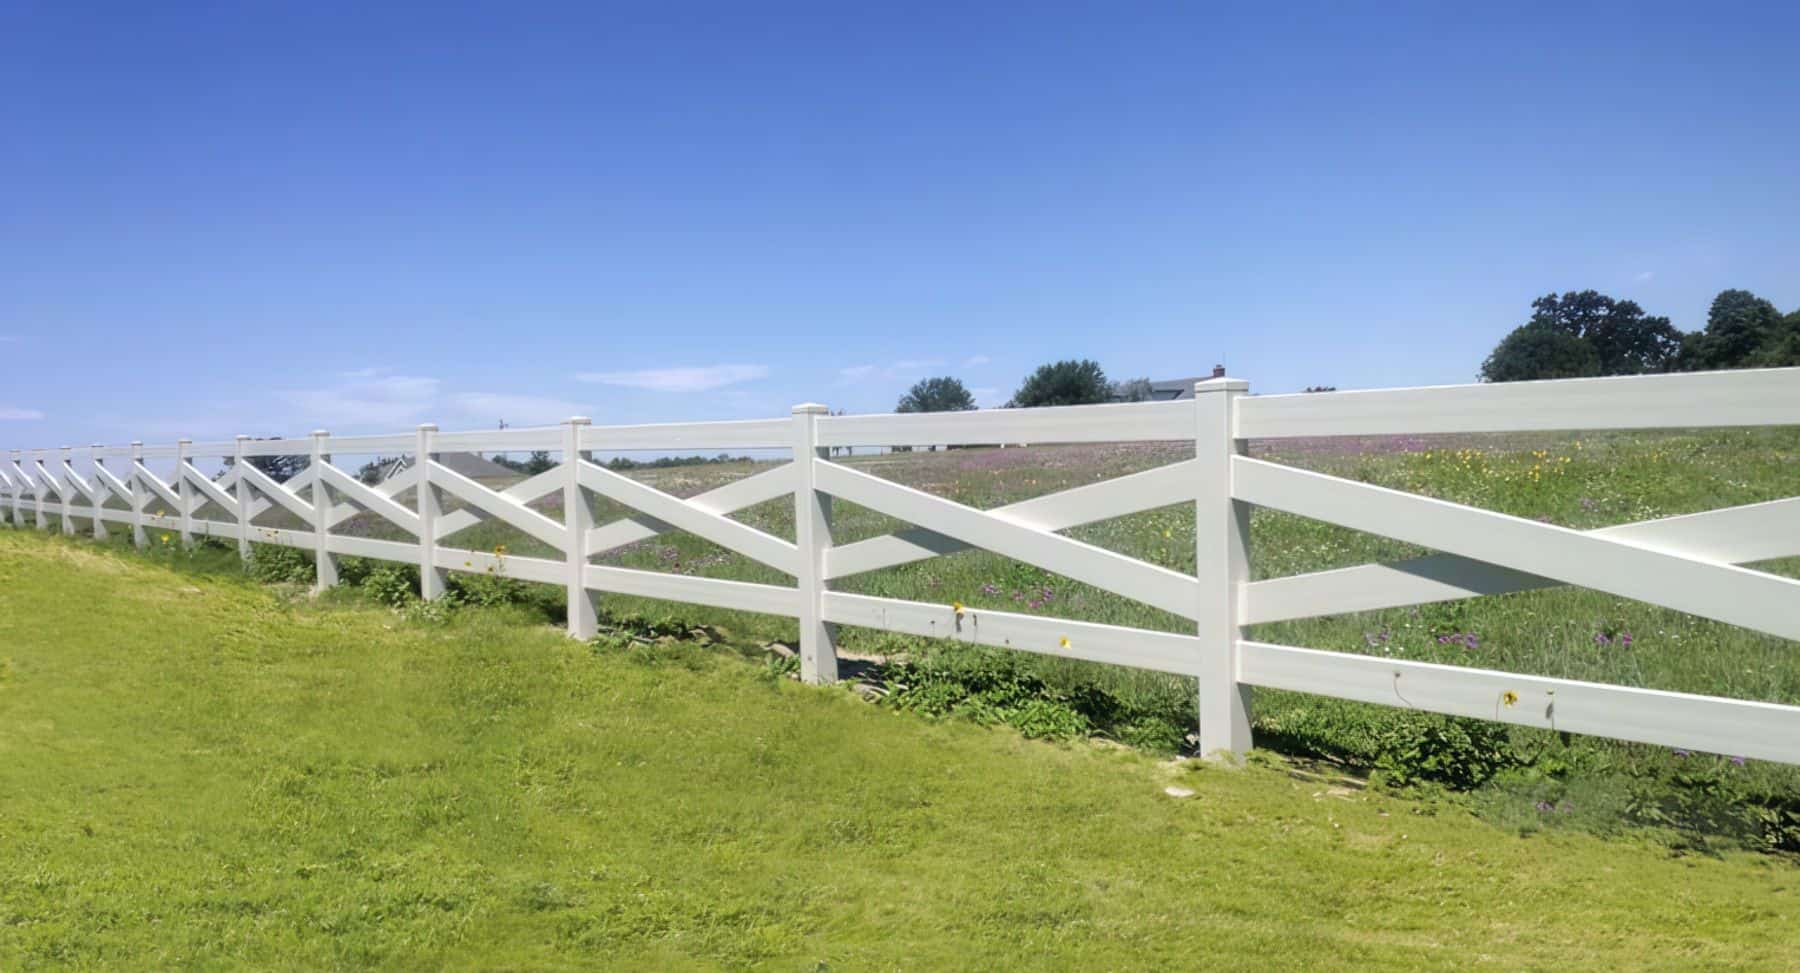 Vinyl cross rail ranch style fence surrounding grassy lawn, with trees in the background - picturesque countryside scene.